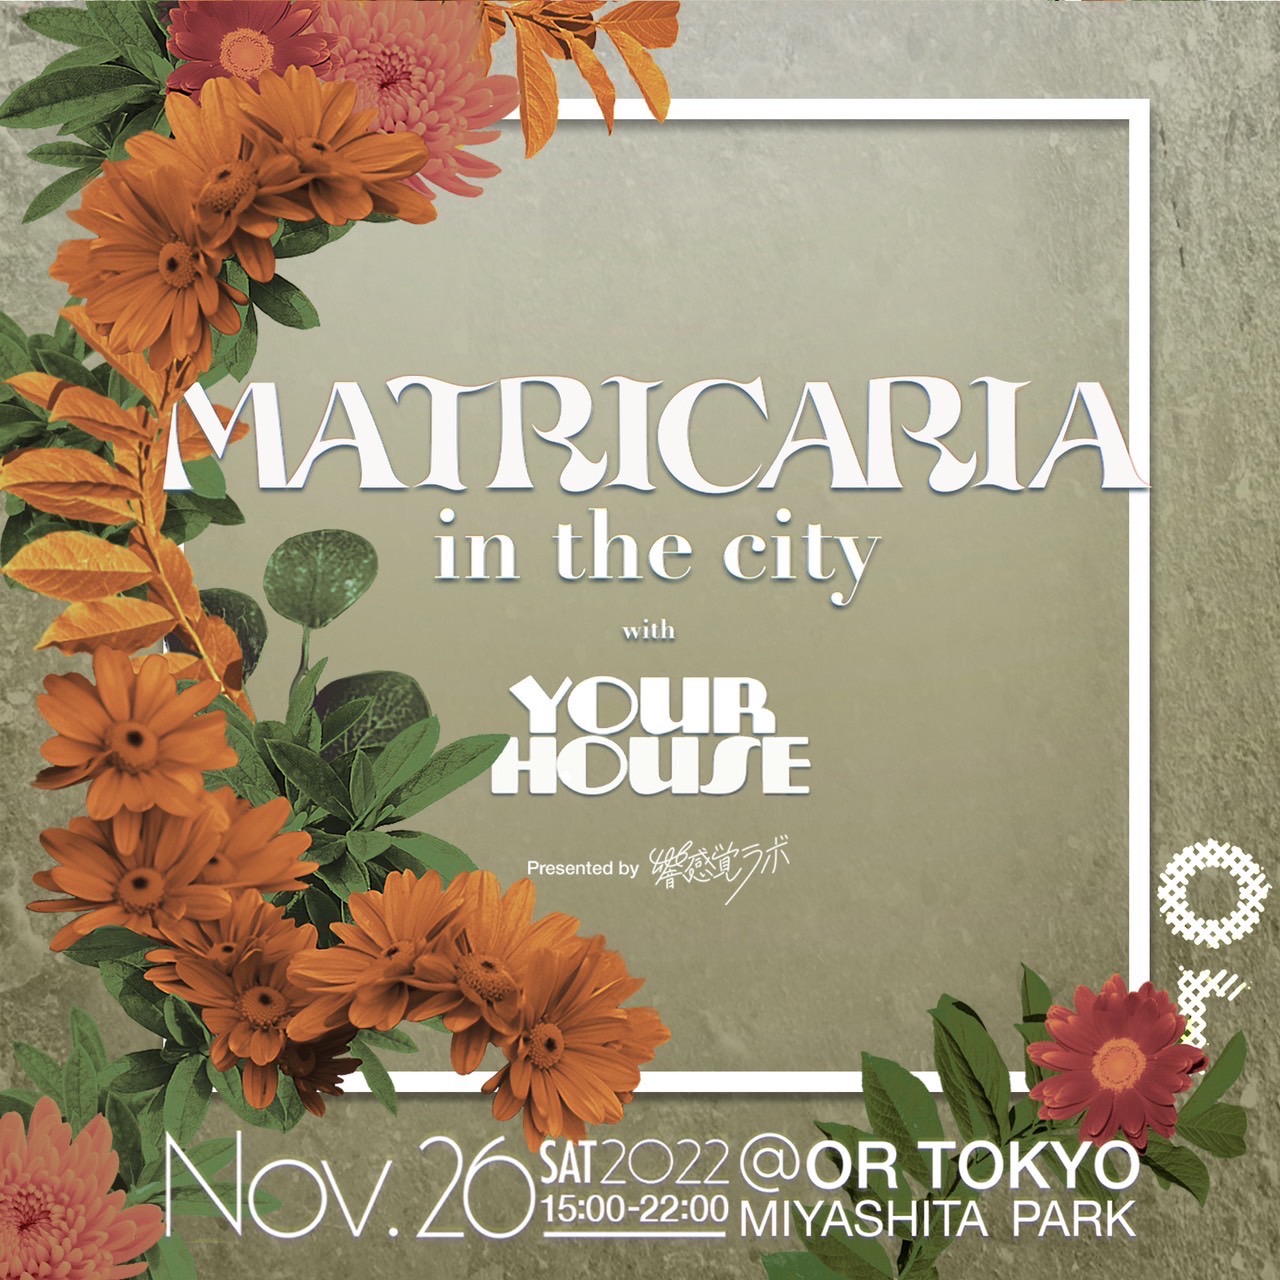 MATRICARIA in the city